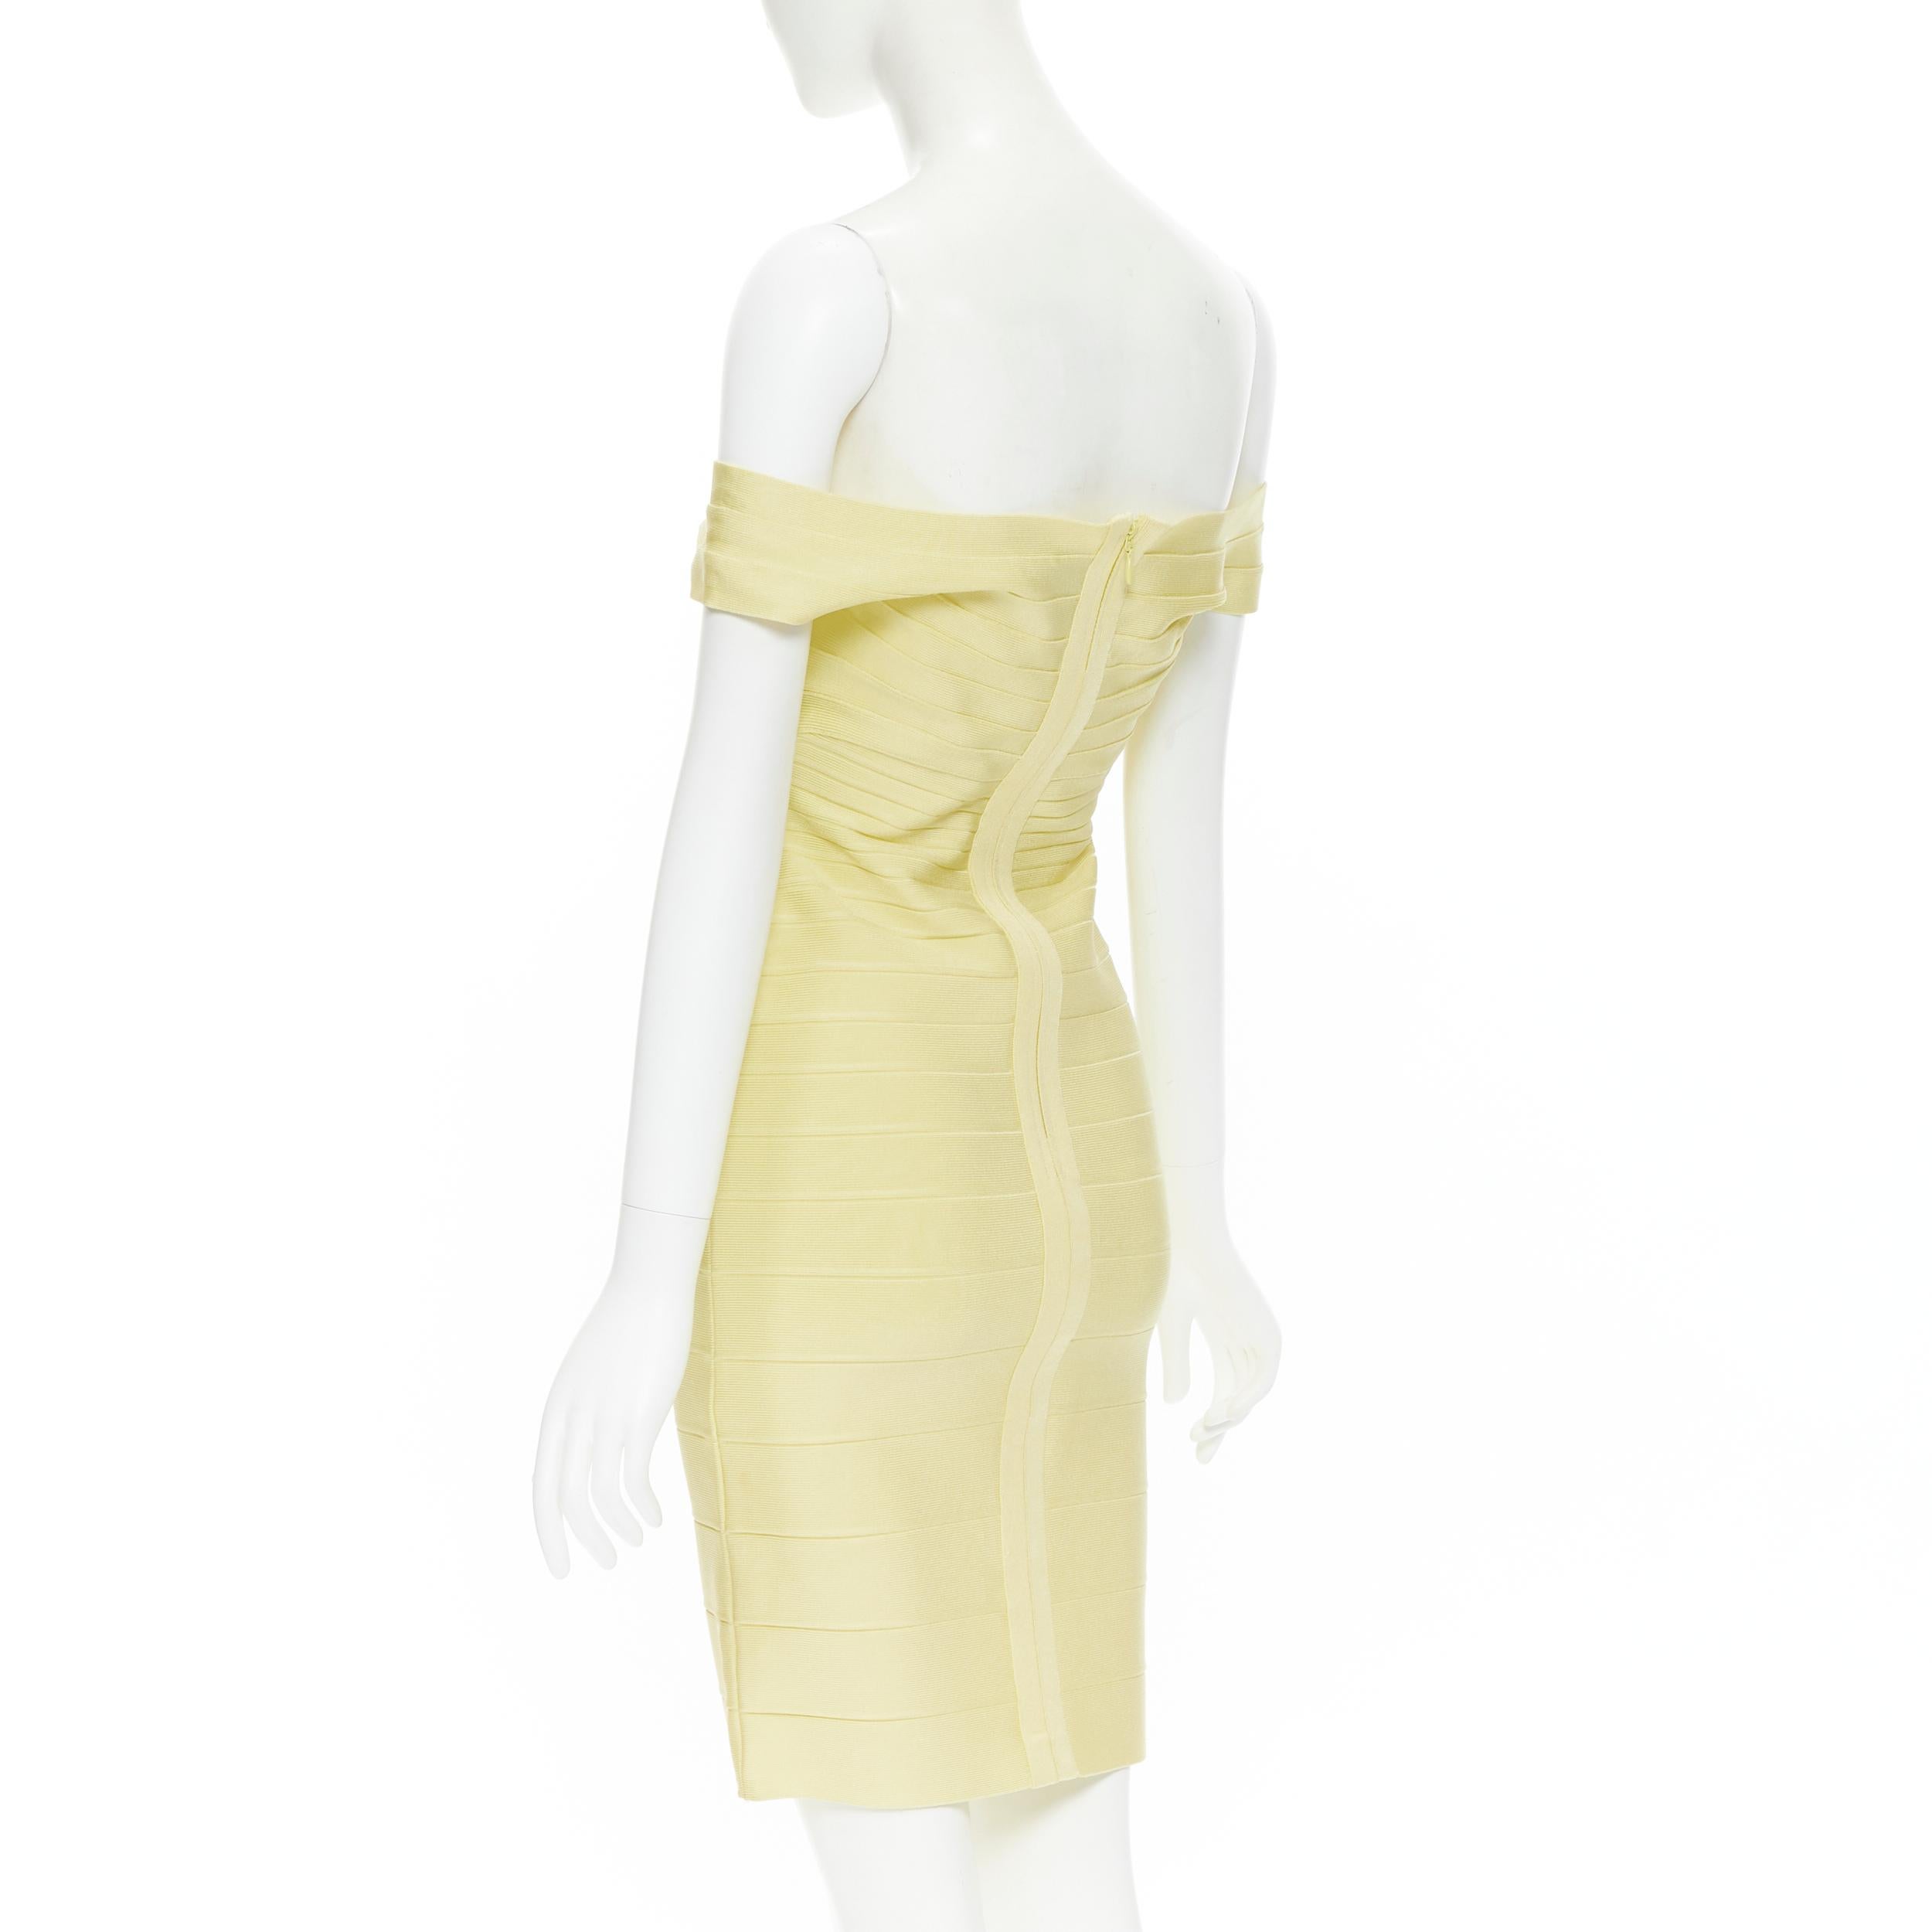 Beige HERVE LEGER yellow off shoulder bodycon bandage fitted dress M